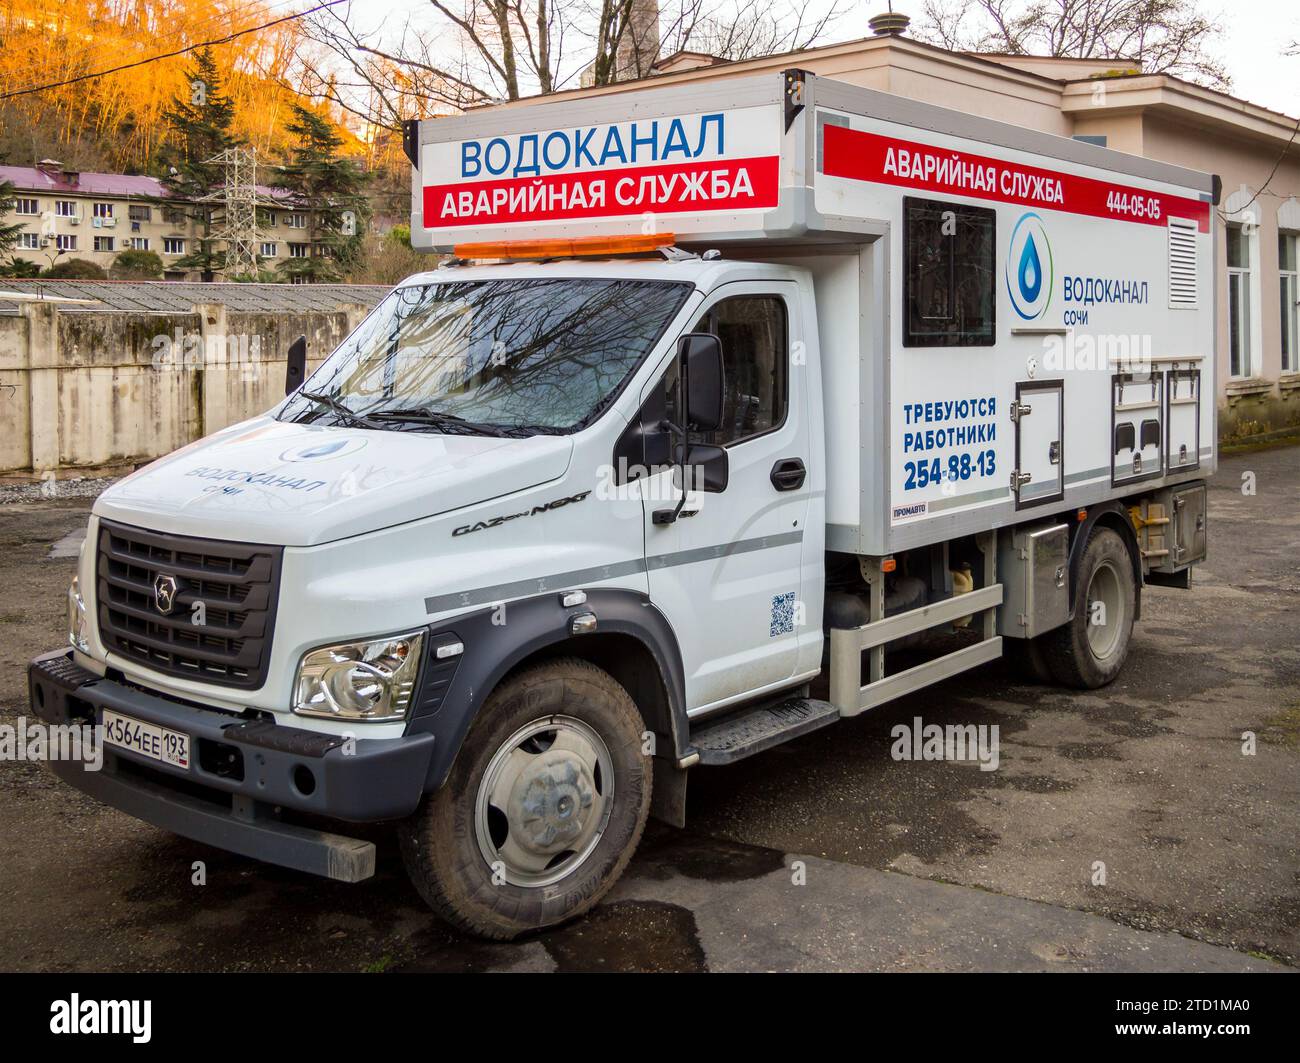 Sochi, Russia - February 13, 2023: Specialized water utility emergency service vehicle Stock Photo